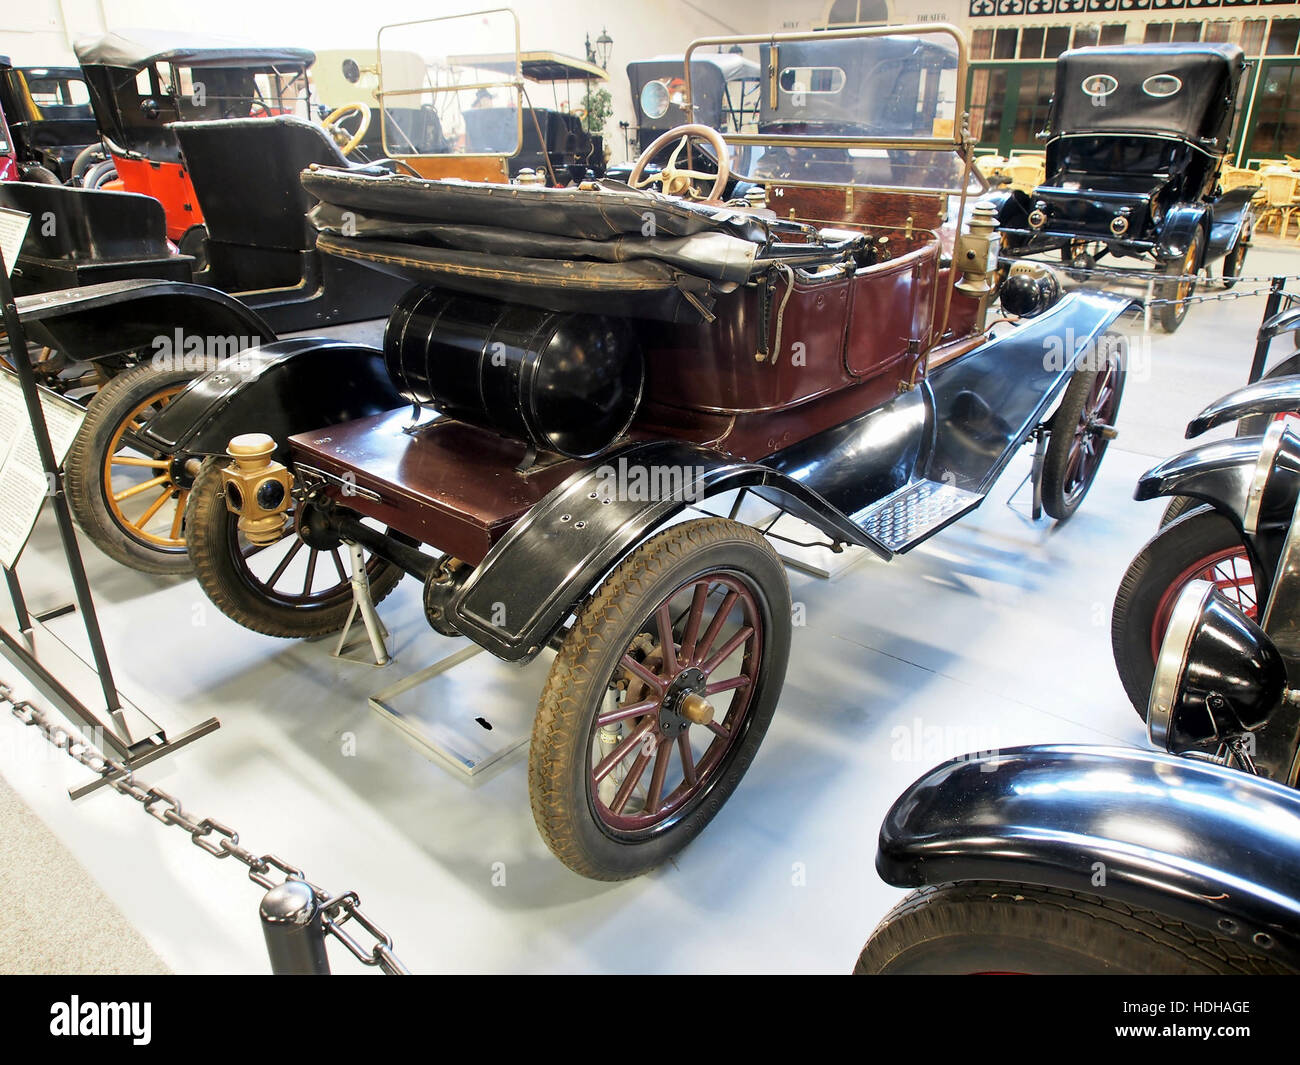 1912 Ford Torpedo Runabout, 4 cylinder, 24hp pic5 Stock Photo